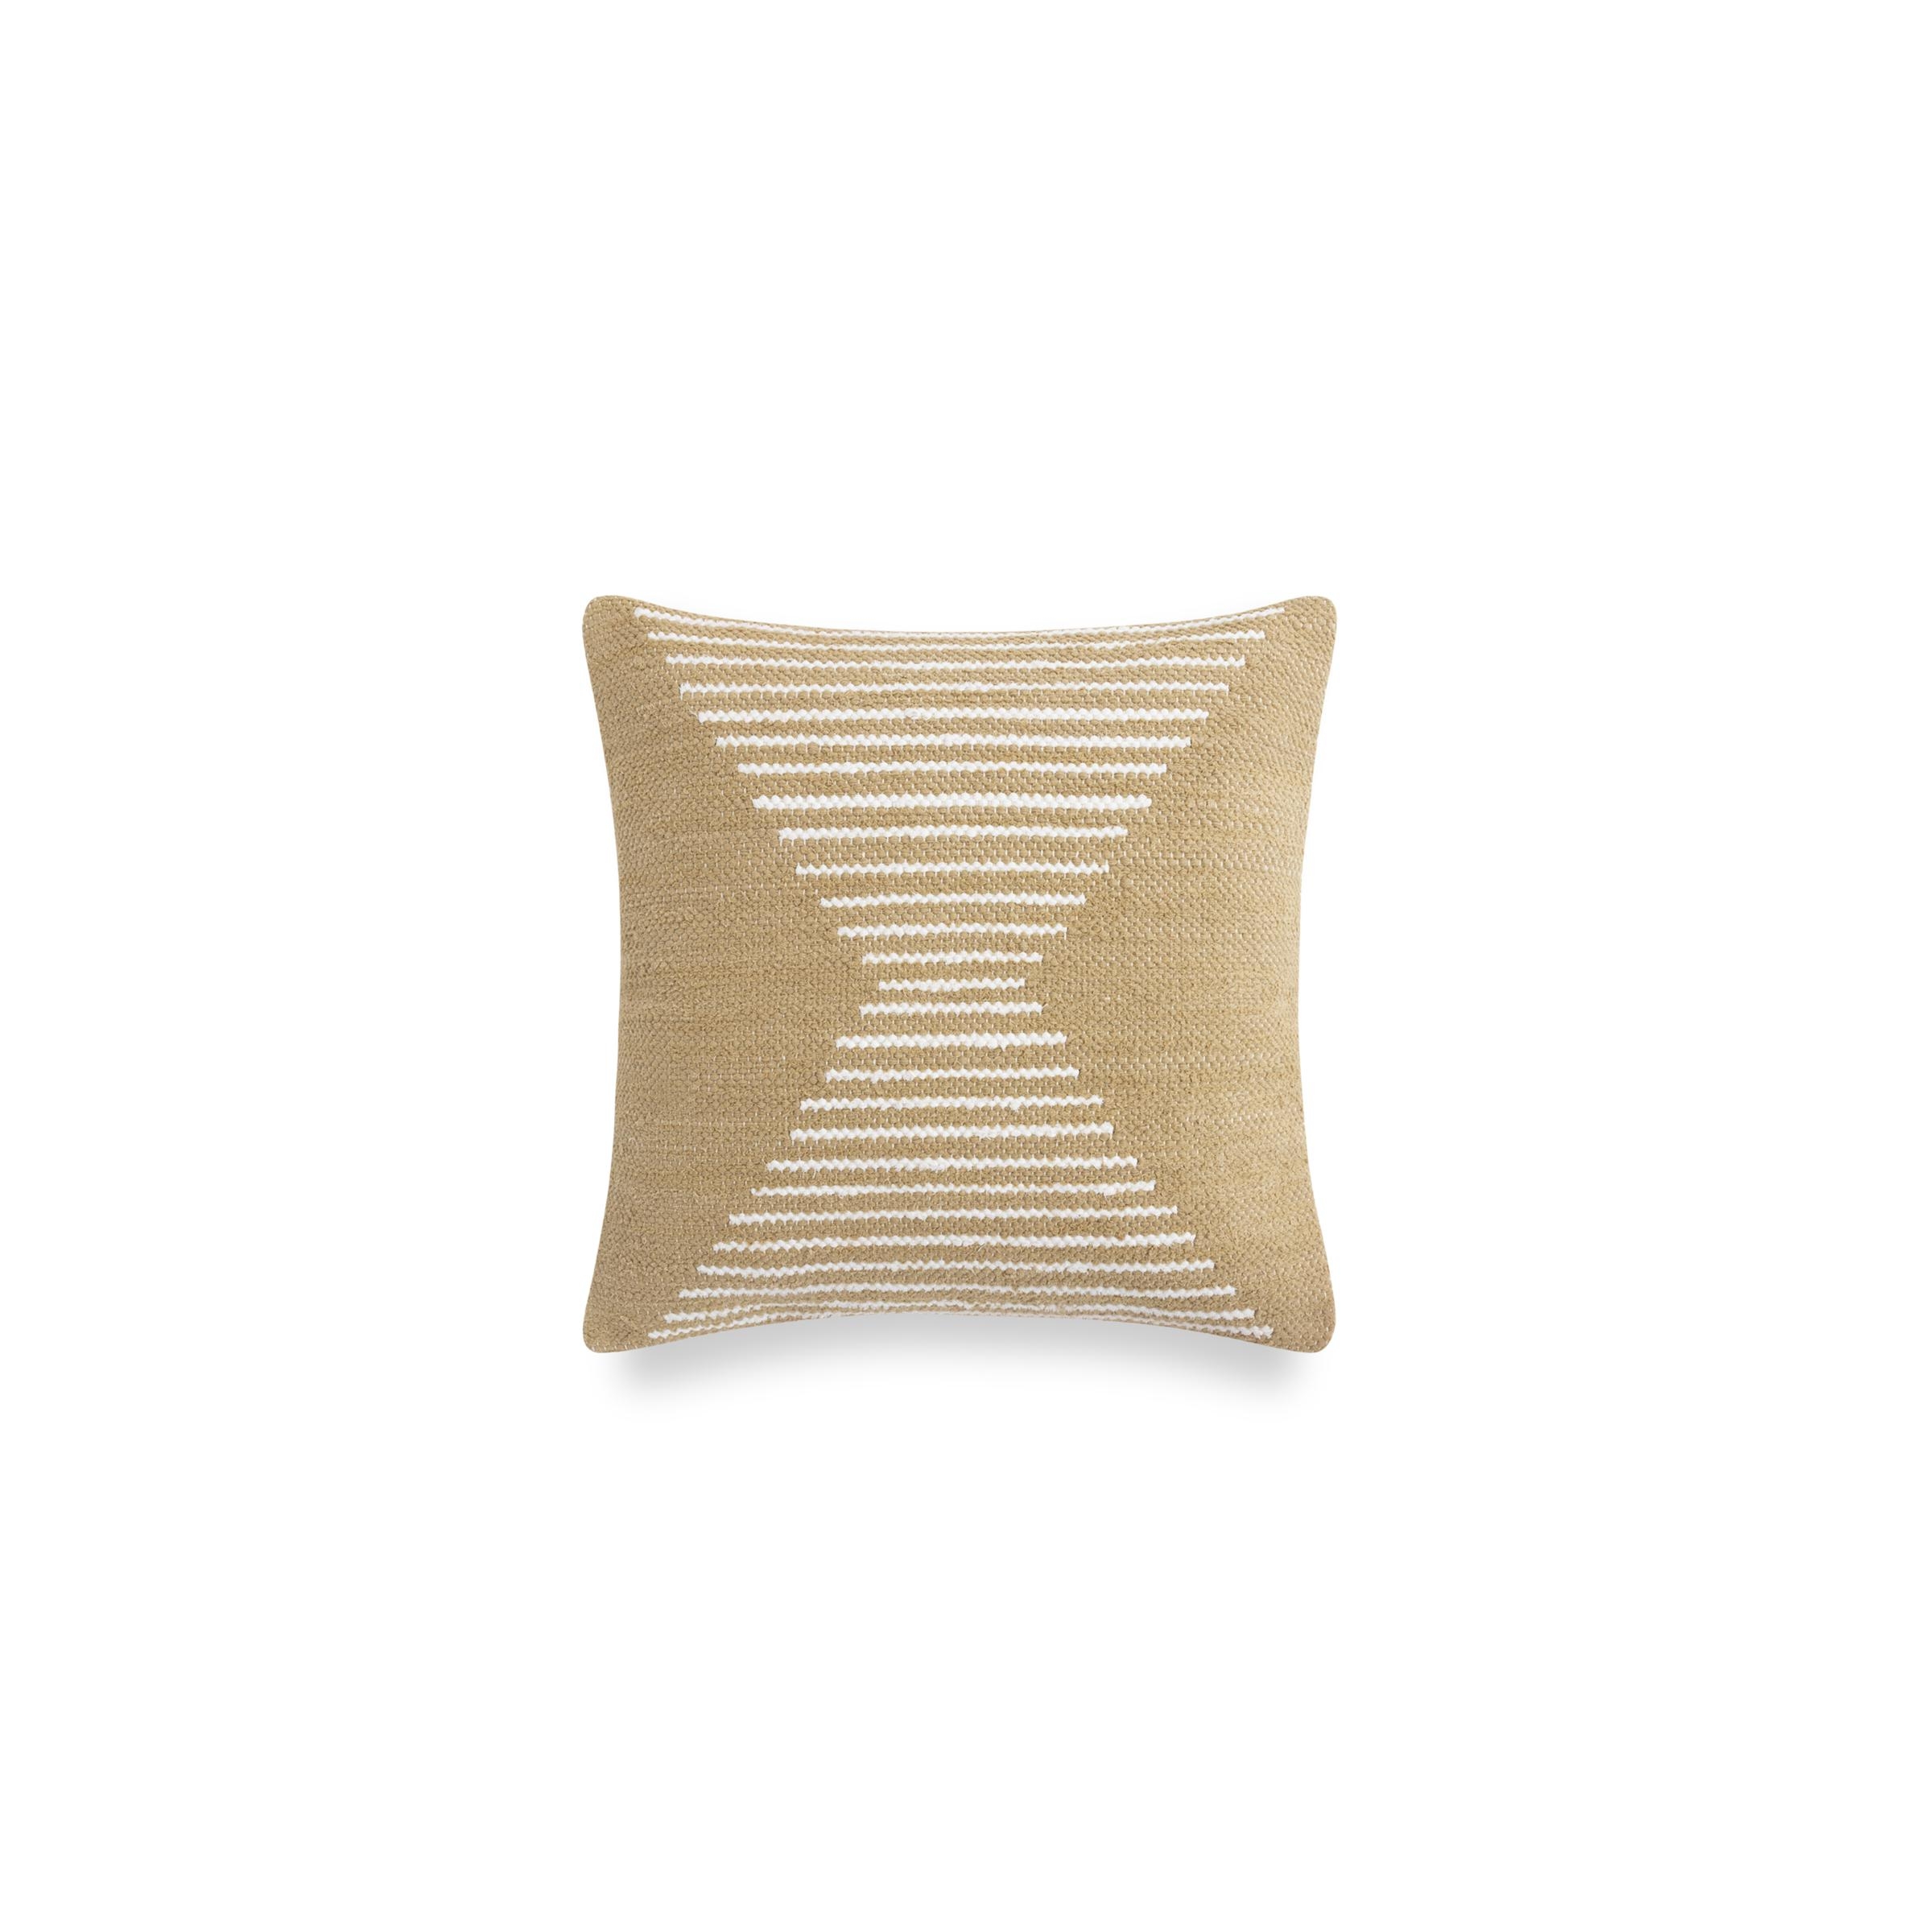 Cathode Pillow Cover, 18" x 18", Sand & Oat - Image 0